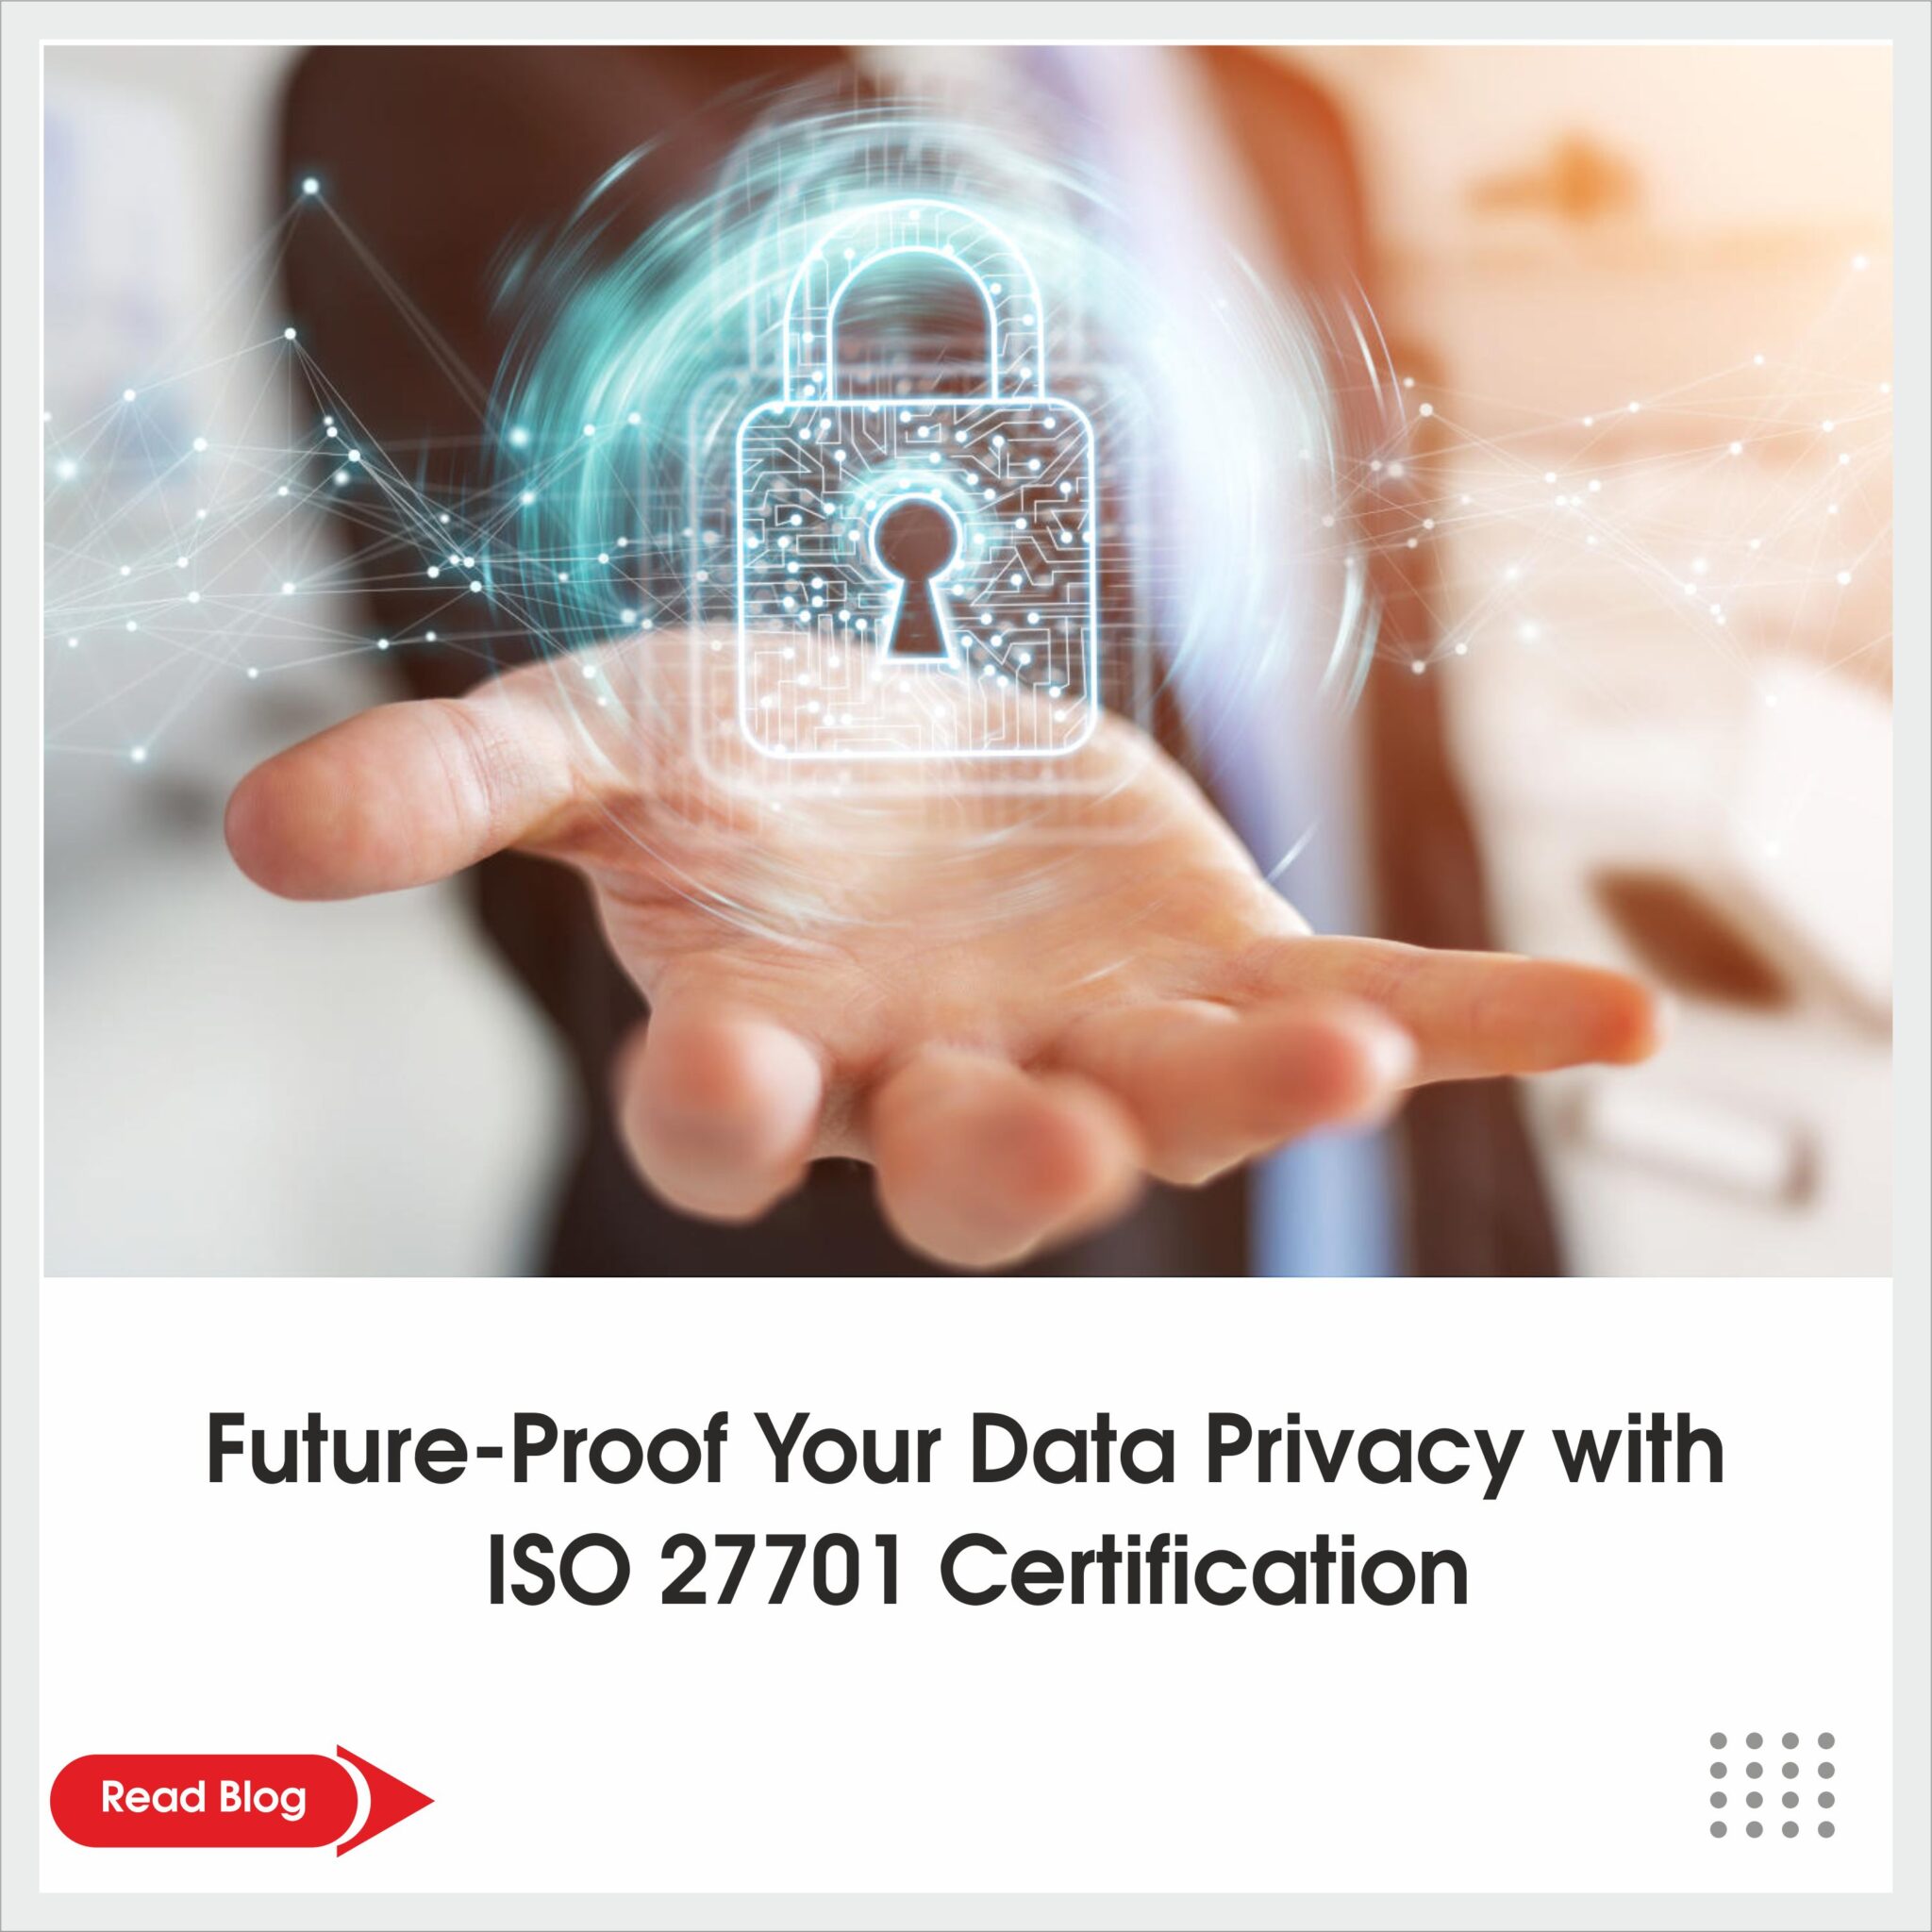 Future-Proof Your Data Privacy with ISO 27701 Certification